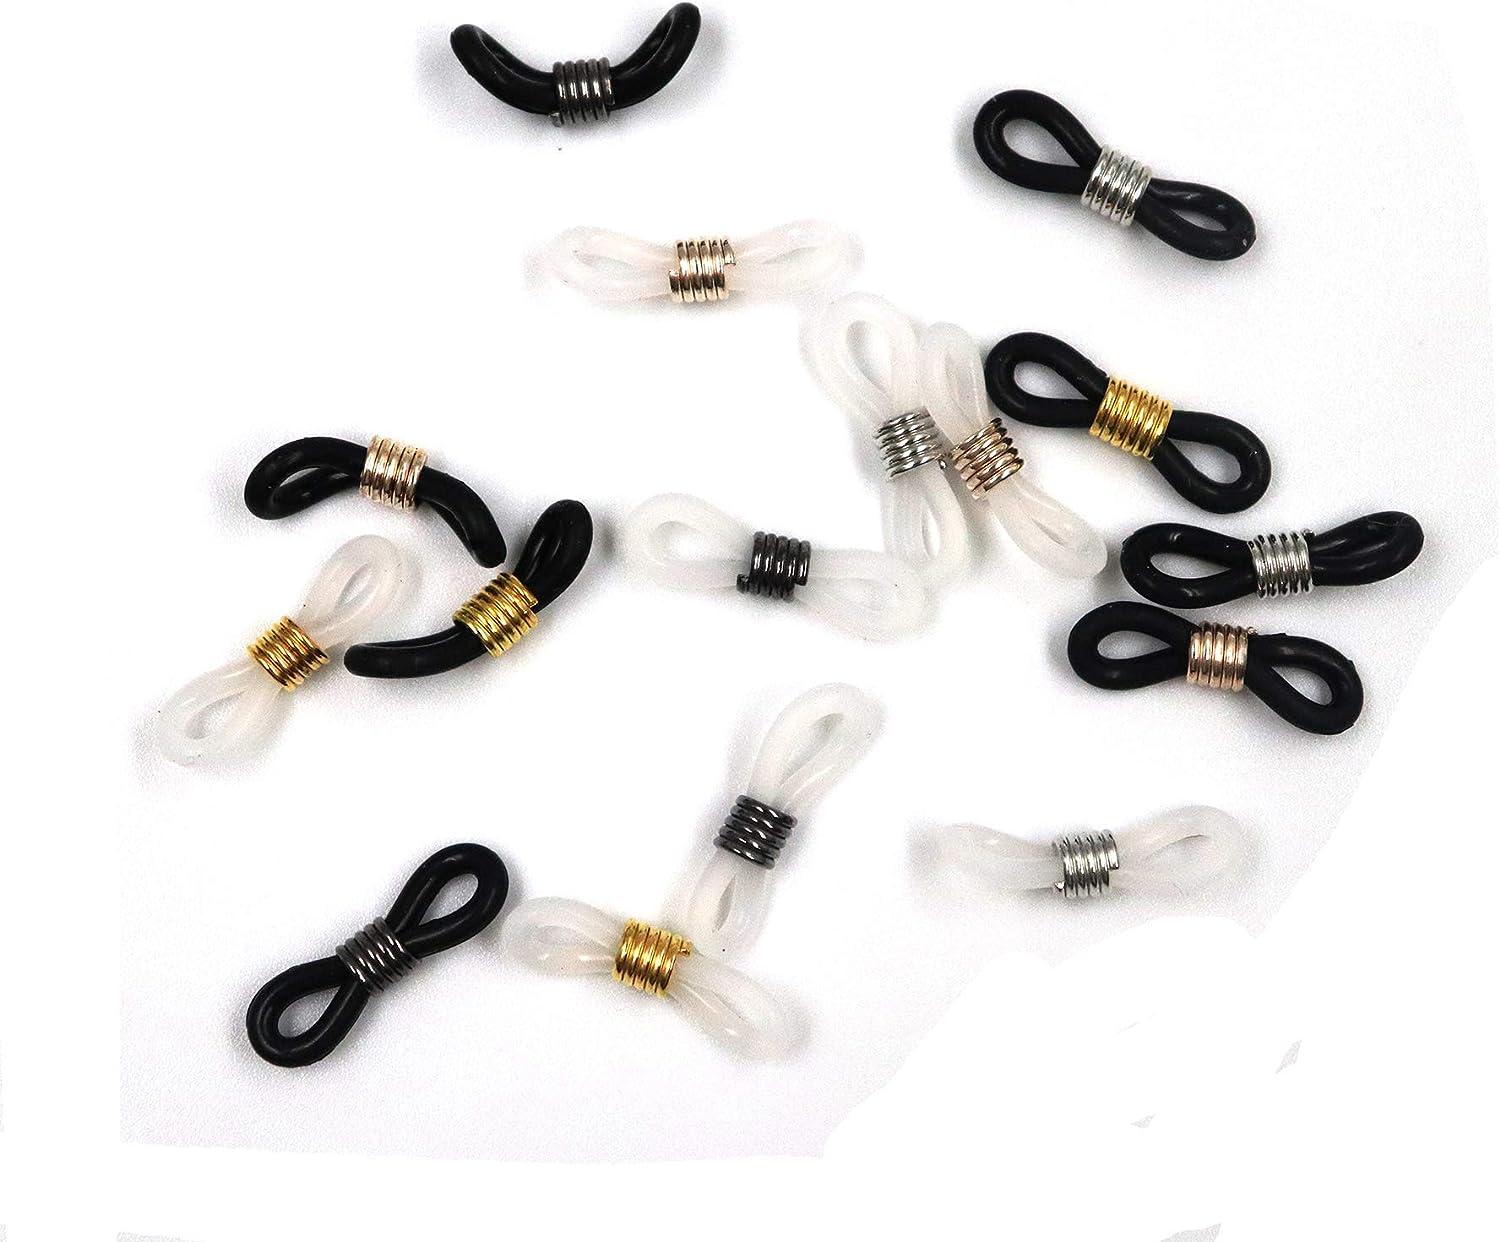  Ruwado 16 Pcs Eyeglass Chain Ends Silicone Adjustable Anti-Slip  Rubber Connectors Eyeglass Strap Retainer Chain Holder Loops for Sunglasses  Sports Eyeglasses Necklace Chain : Arts, Crafts & Sewing